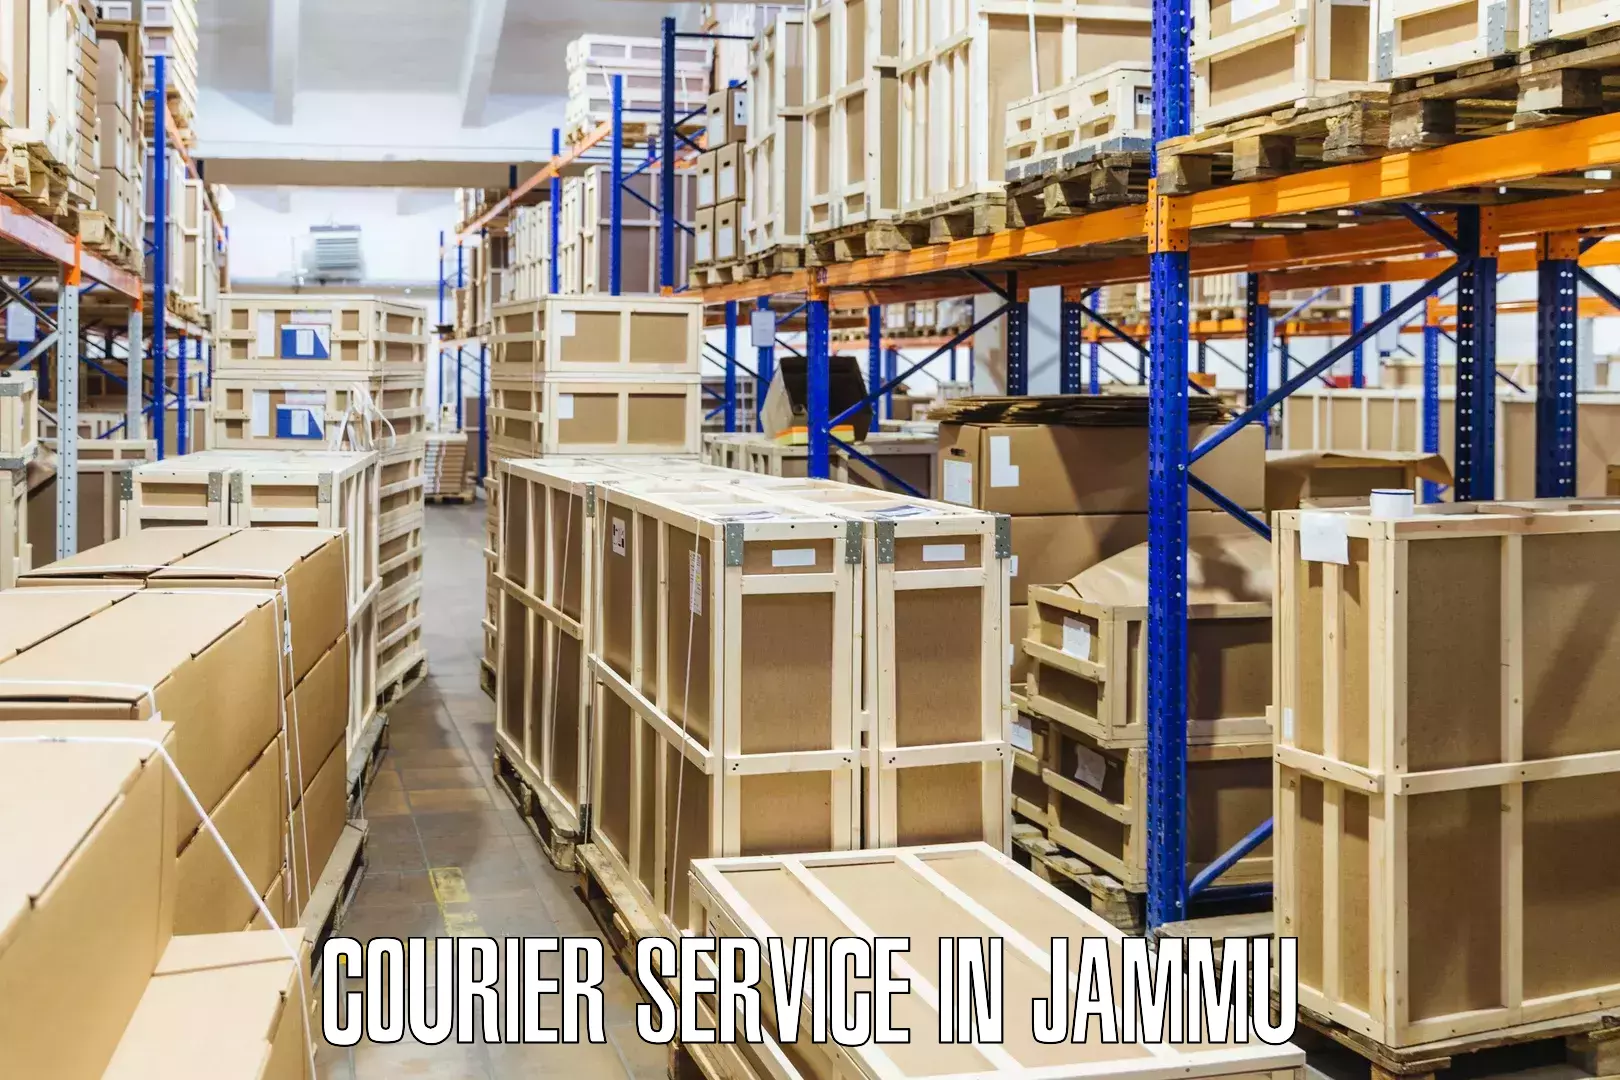 Multi-national courier services in Jammu